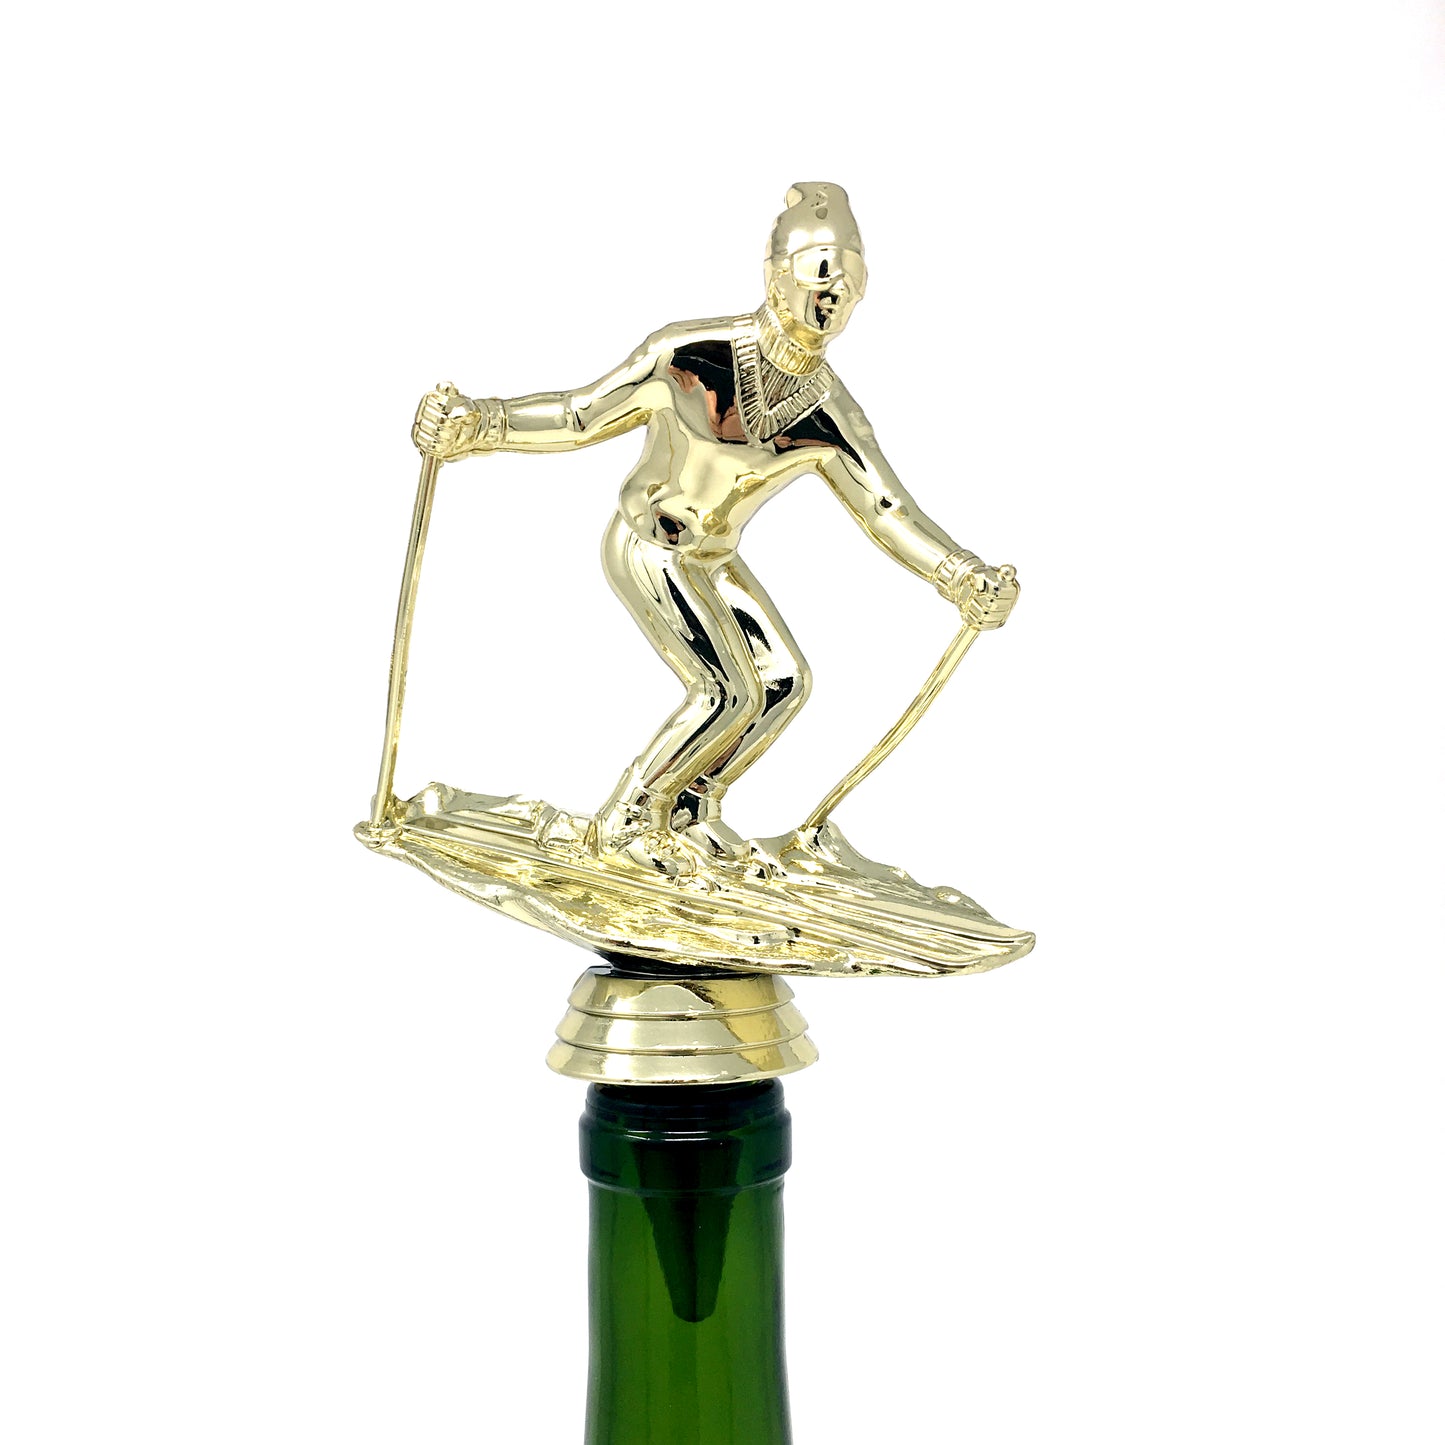 Skiing Trophy Wine Bottle Stopper with Stainless Steel Base